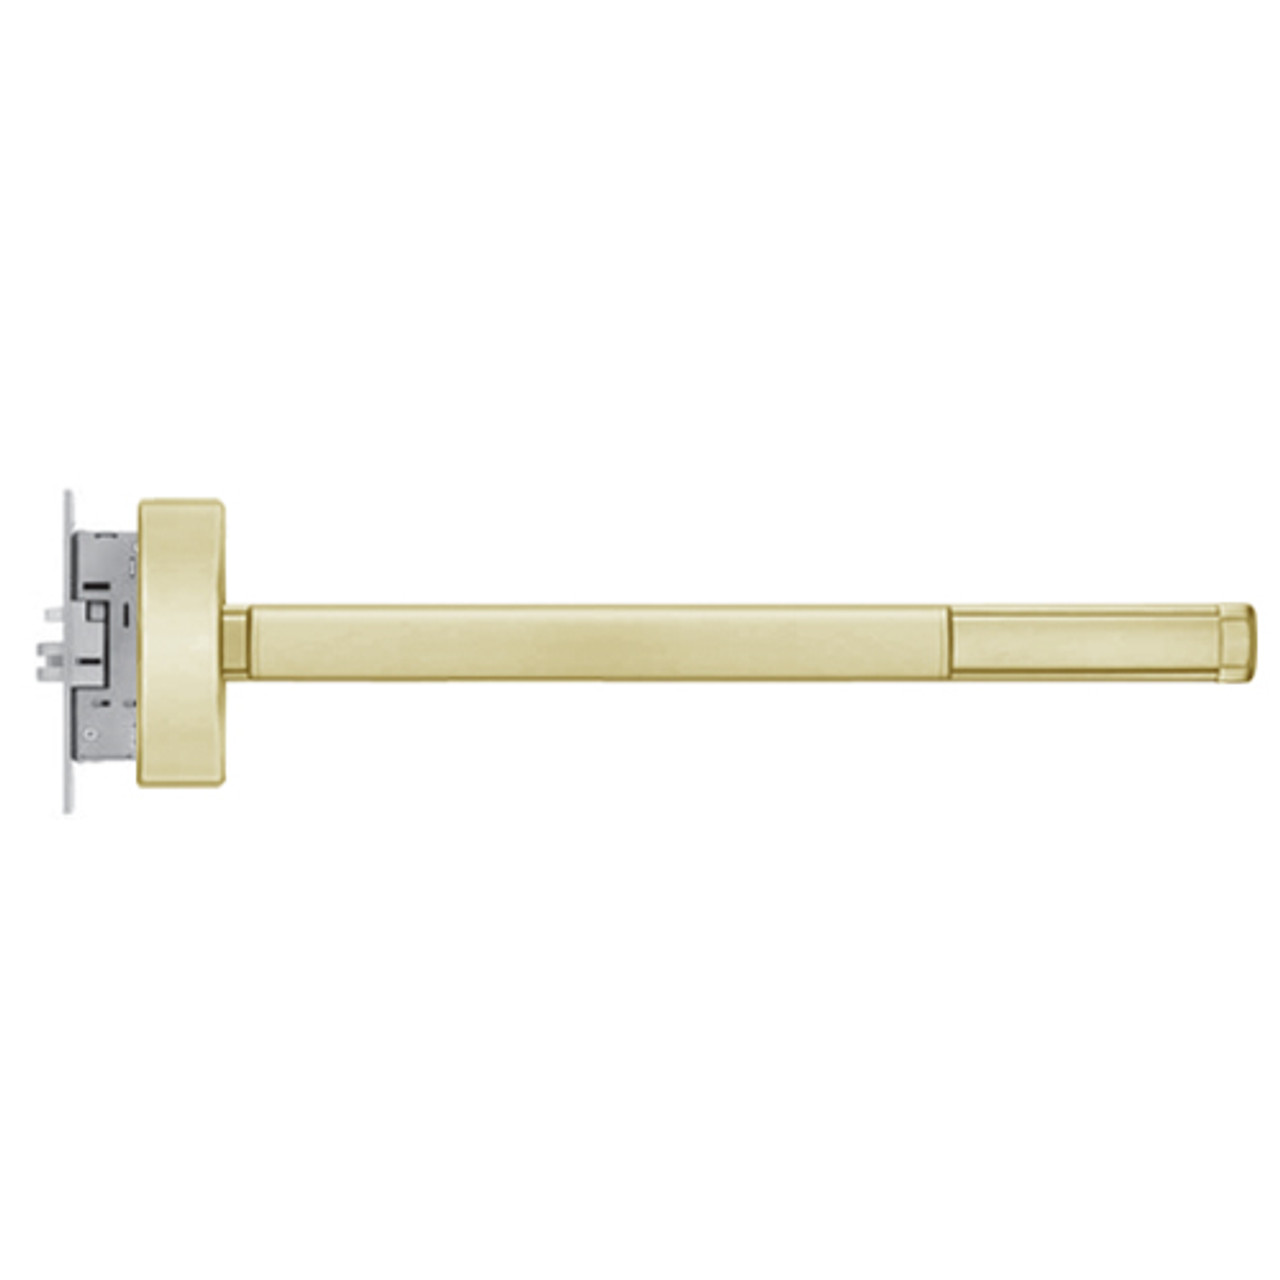 MLRFL2315-RHR-606-36 PHI 2300 Series Fire Rated Apex Mortise Exit Device with Motorized Latch Retraction Prepped for Thumb Piece Always Active in Satin Brass Finish